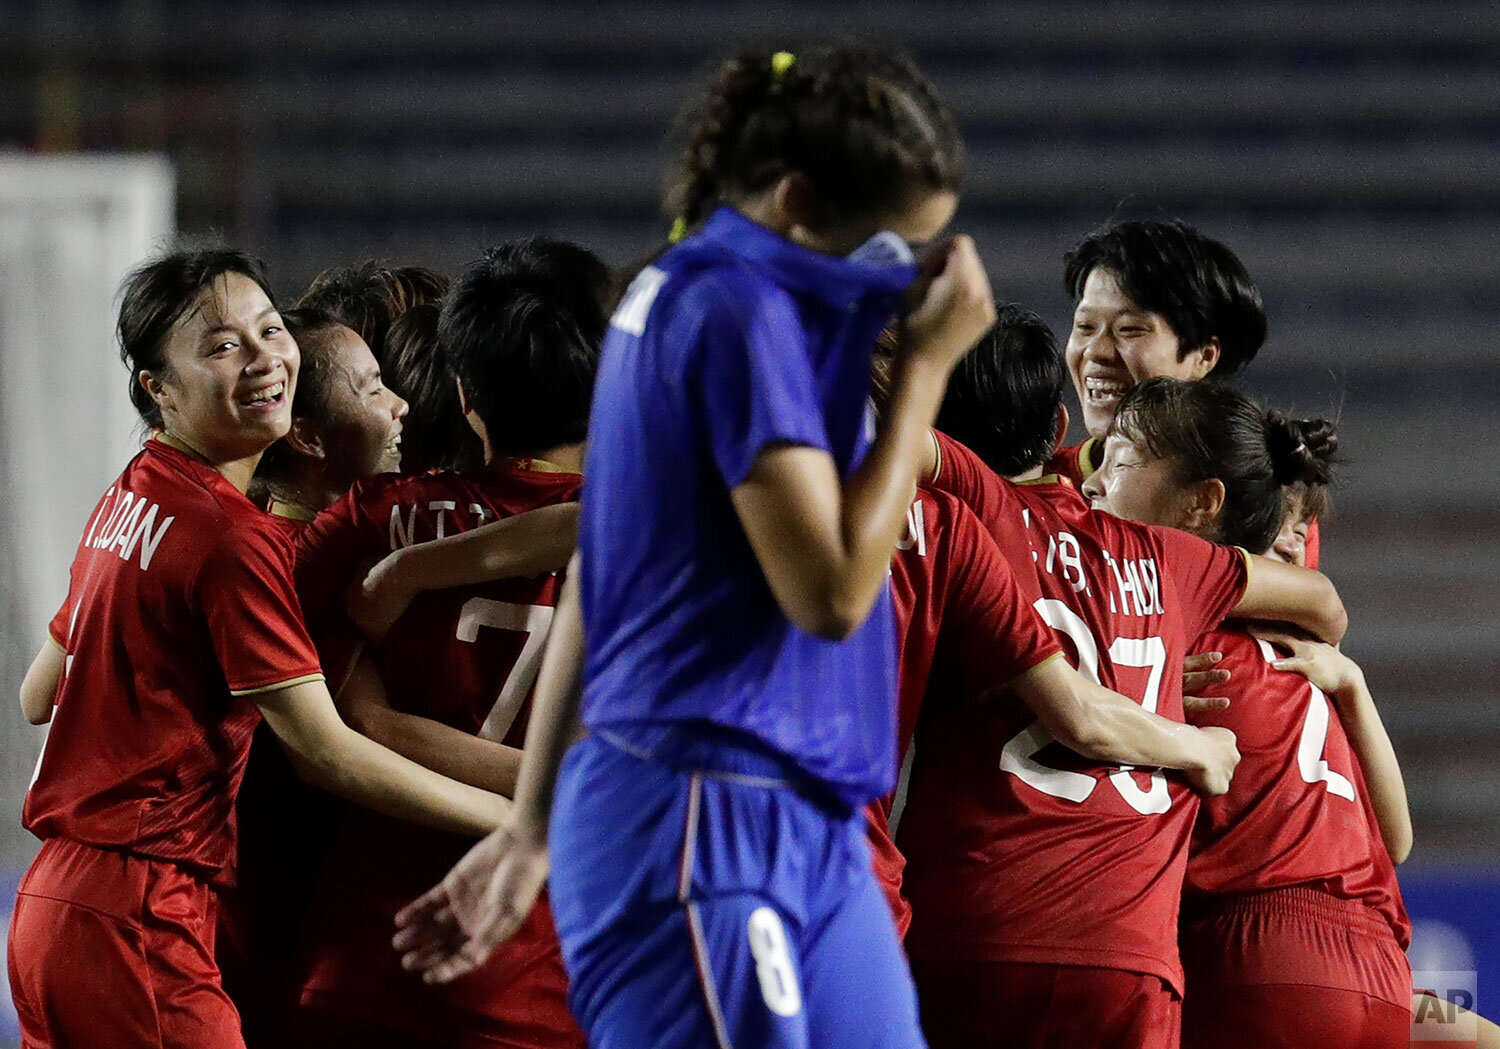  Vietnamese players celebrate while a Thai player passes by after their womenÅfs football finals match at the 30th South East Asian Games in Manila, Philippines on Sunday Dec. 8, 2019. Vietnam won gold. The Southeast Asian Games, also known as the SE